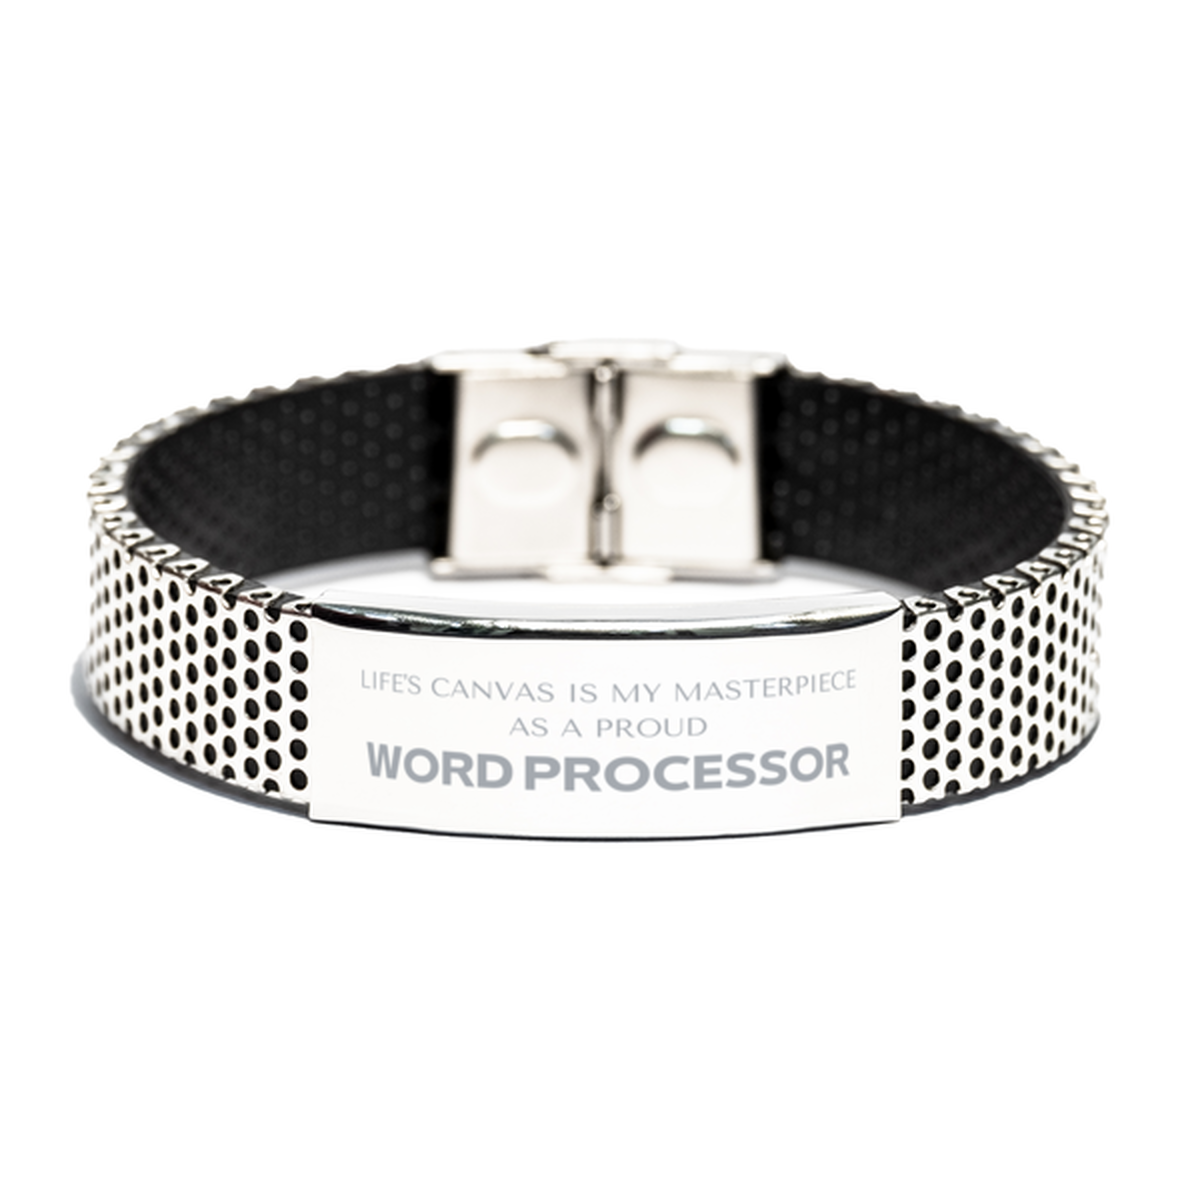 Proud Word Processor Gifts, Life's canvas is my masterpiece, Epic Birthday Christmas Unique Stainless Steel Bracelet For Word Processor, Coworkers, Men, Women, Friends